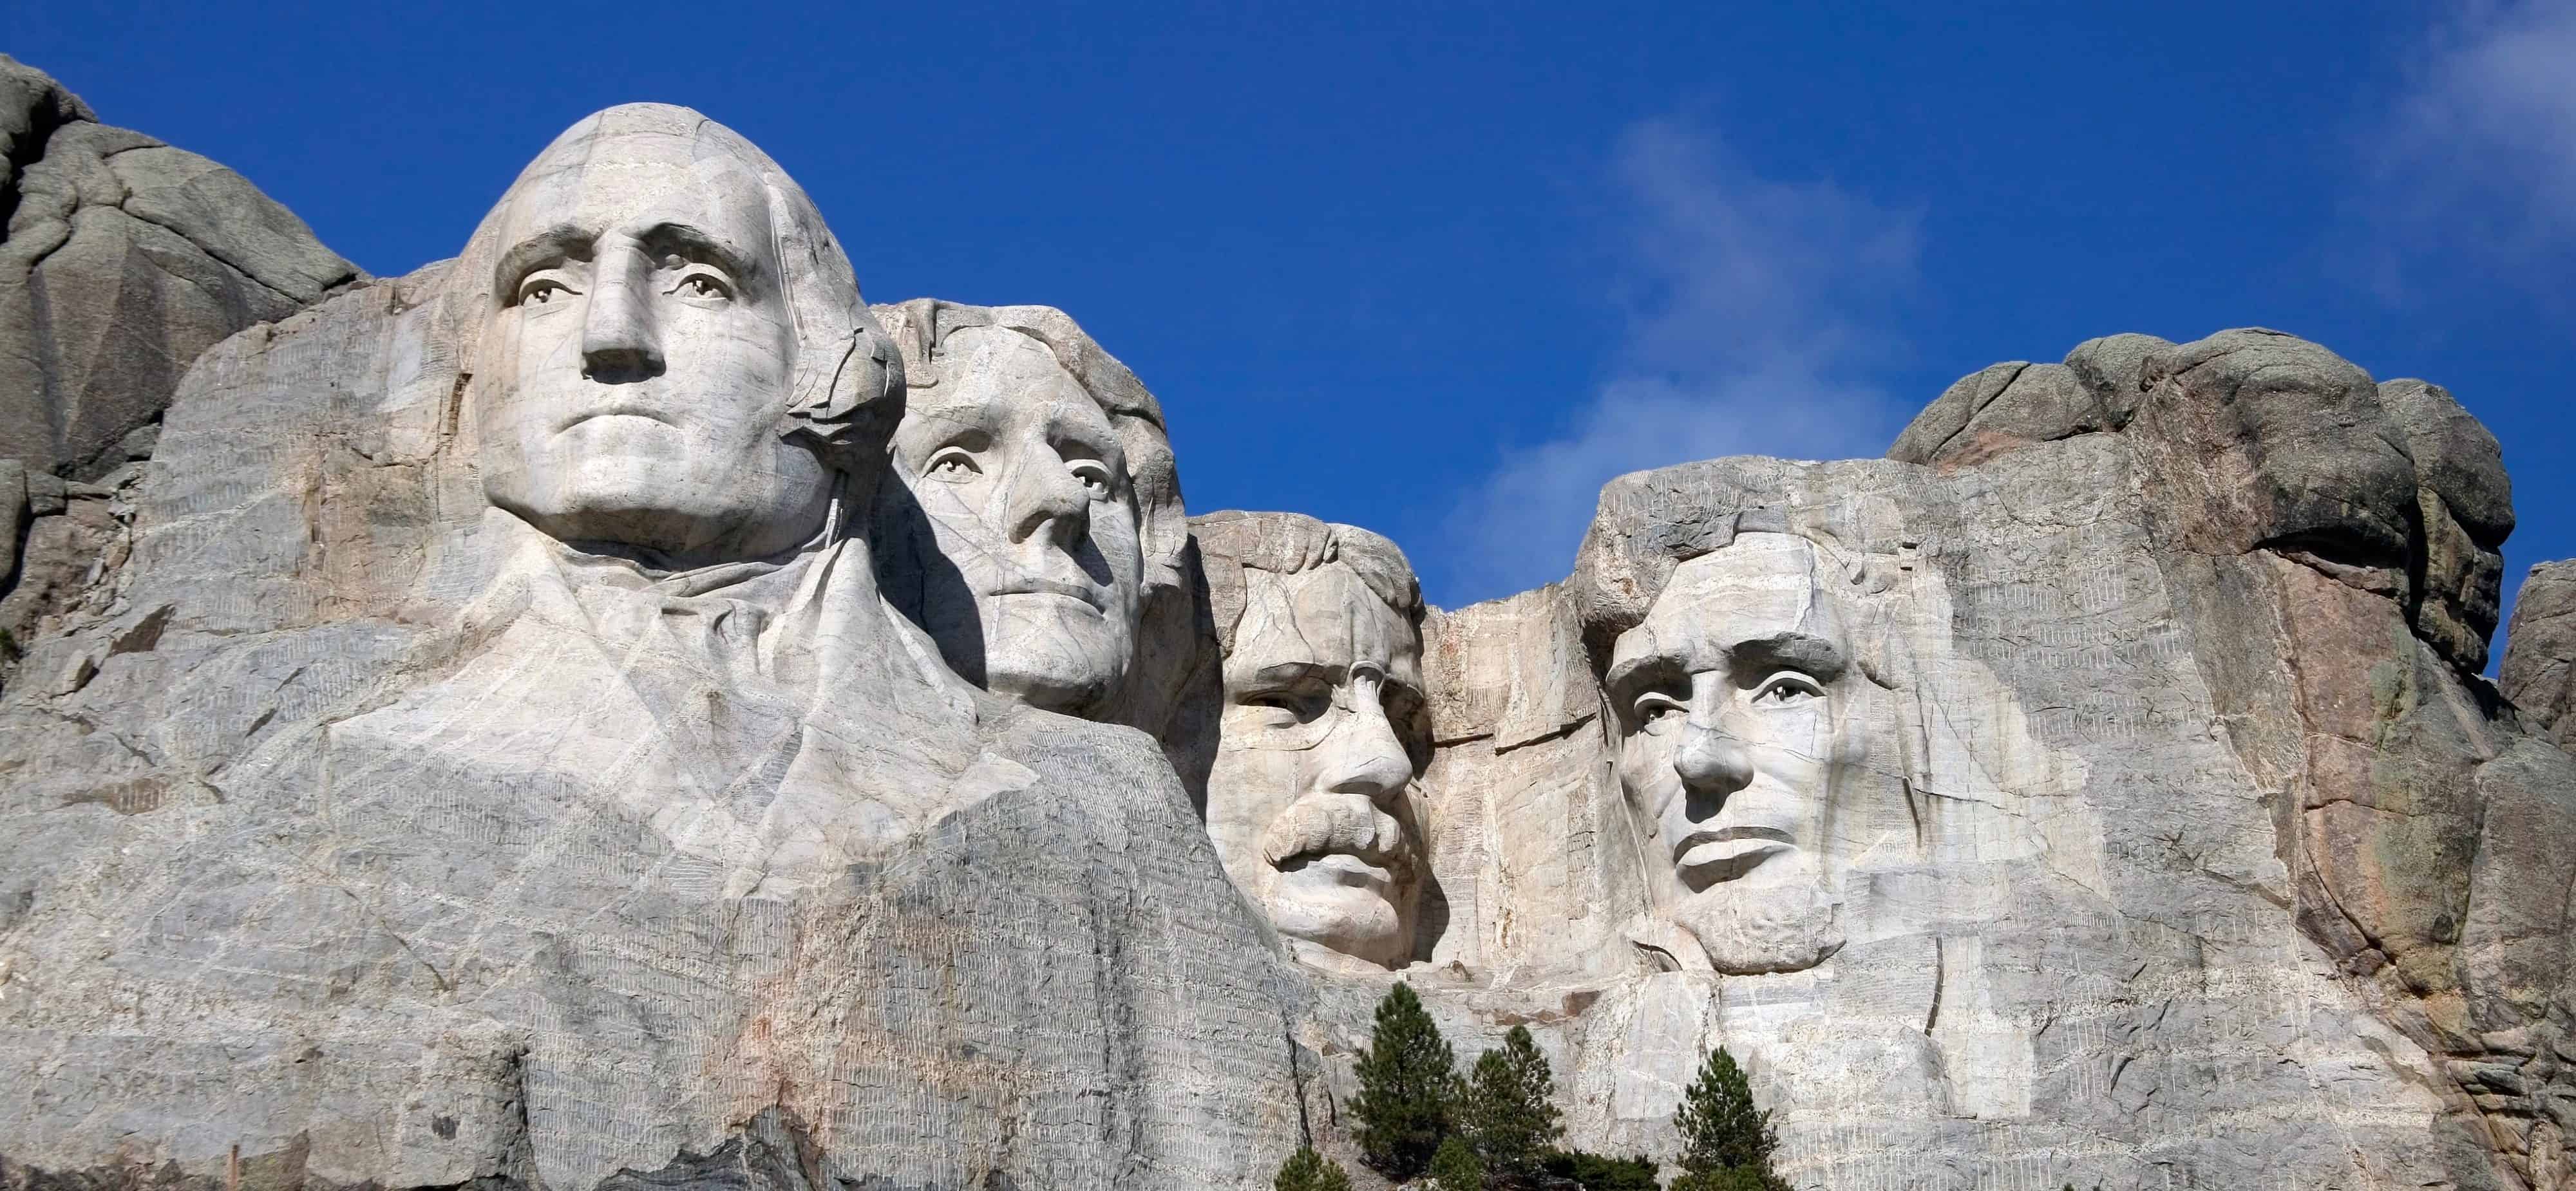 Close up view of Mount Rushmore under a blue sky